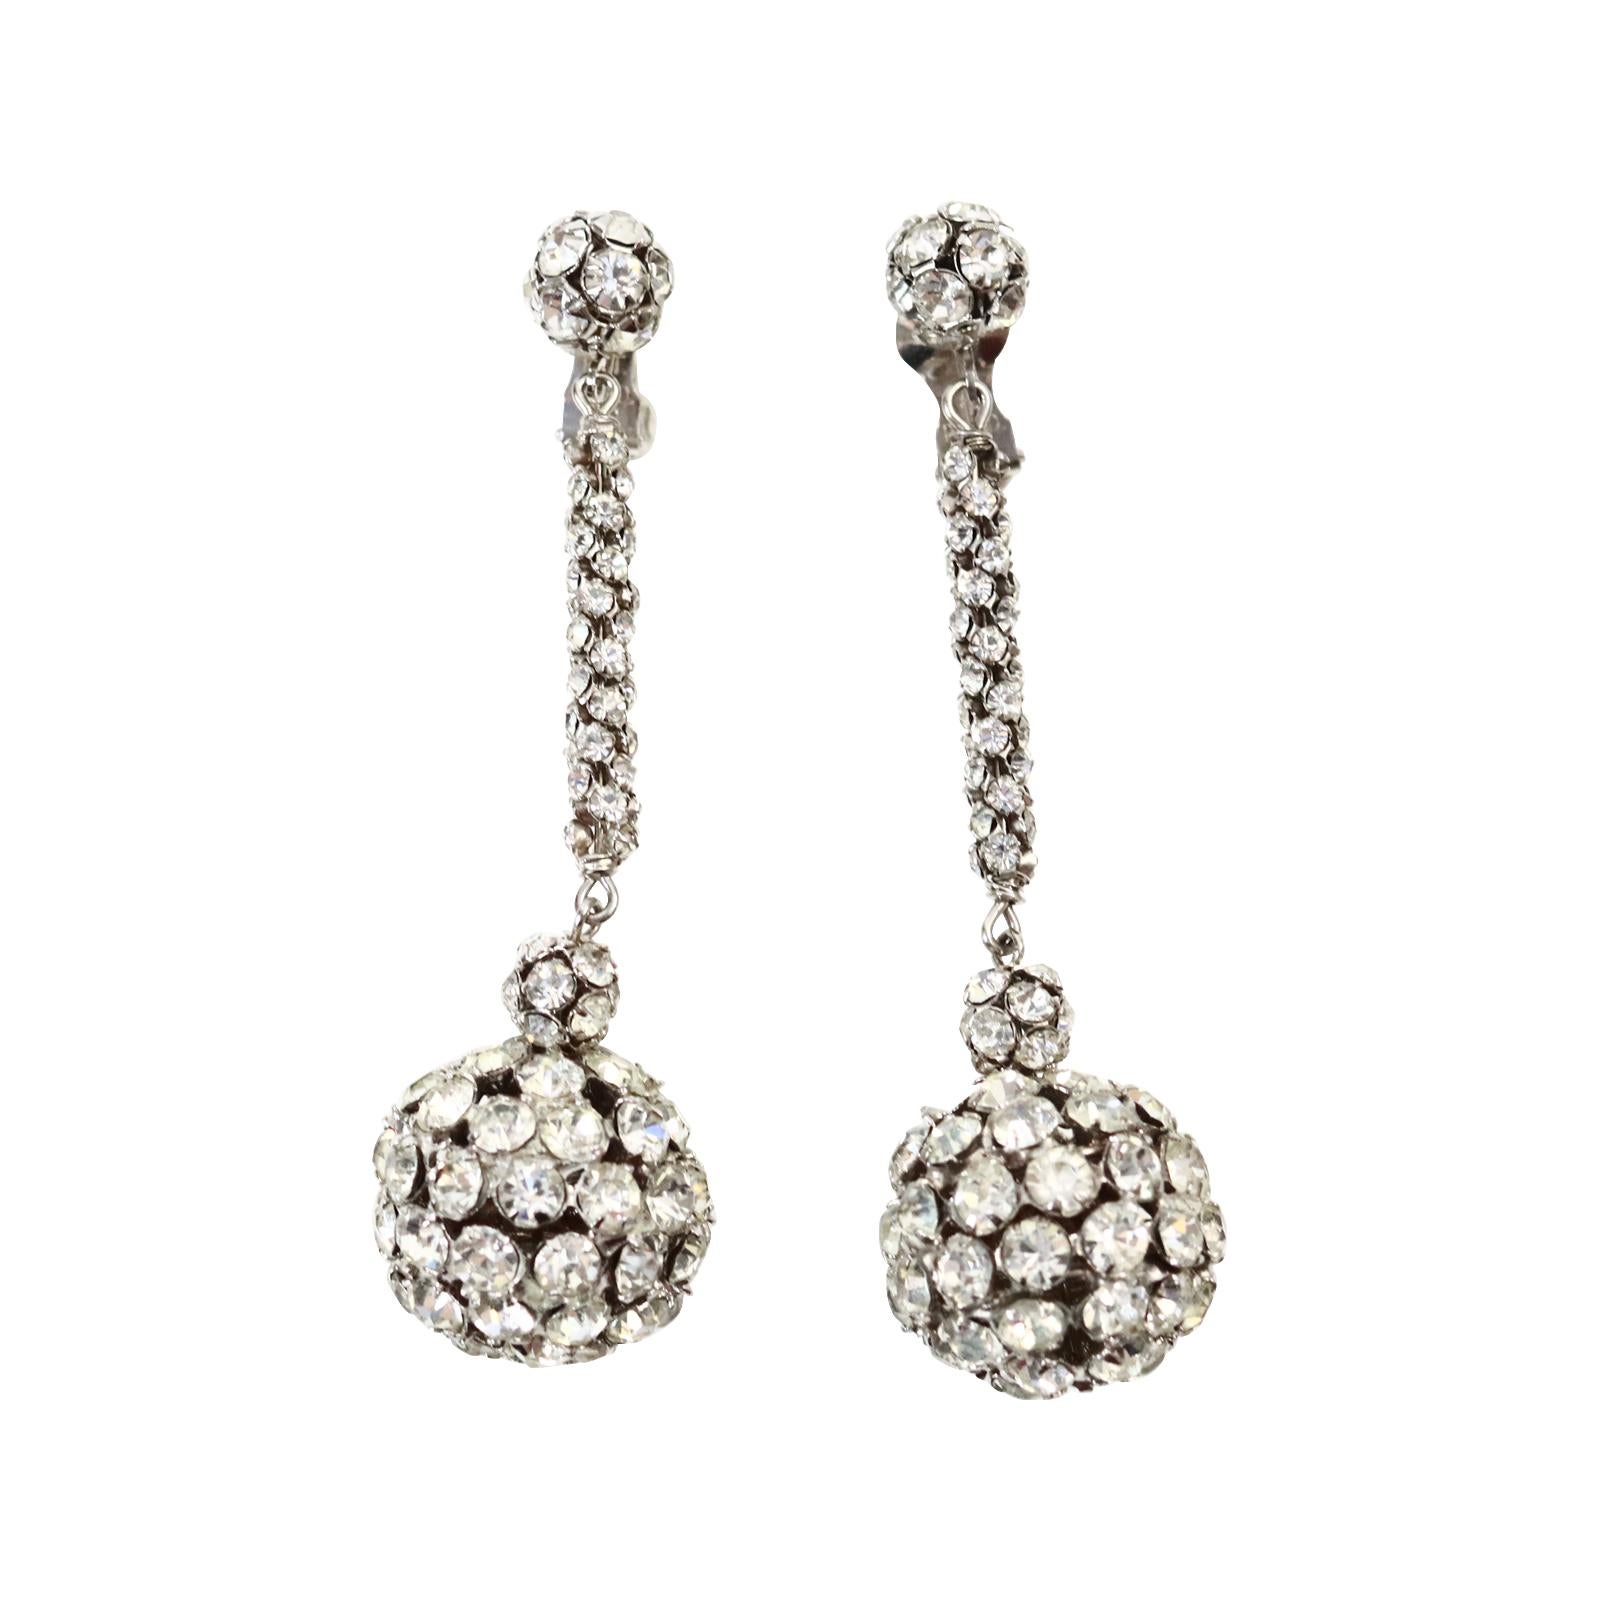 Vintage Rondell Dangle Ball  Earrings Circa 1960s. These earrings just bring a smile to my day. They are so well made and just spectacular.  There is  a larger rondell ball at the bottom that then has a rondell ball on top of that that is joined by